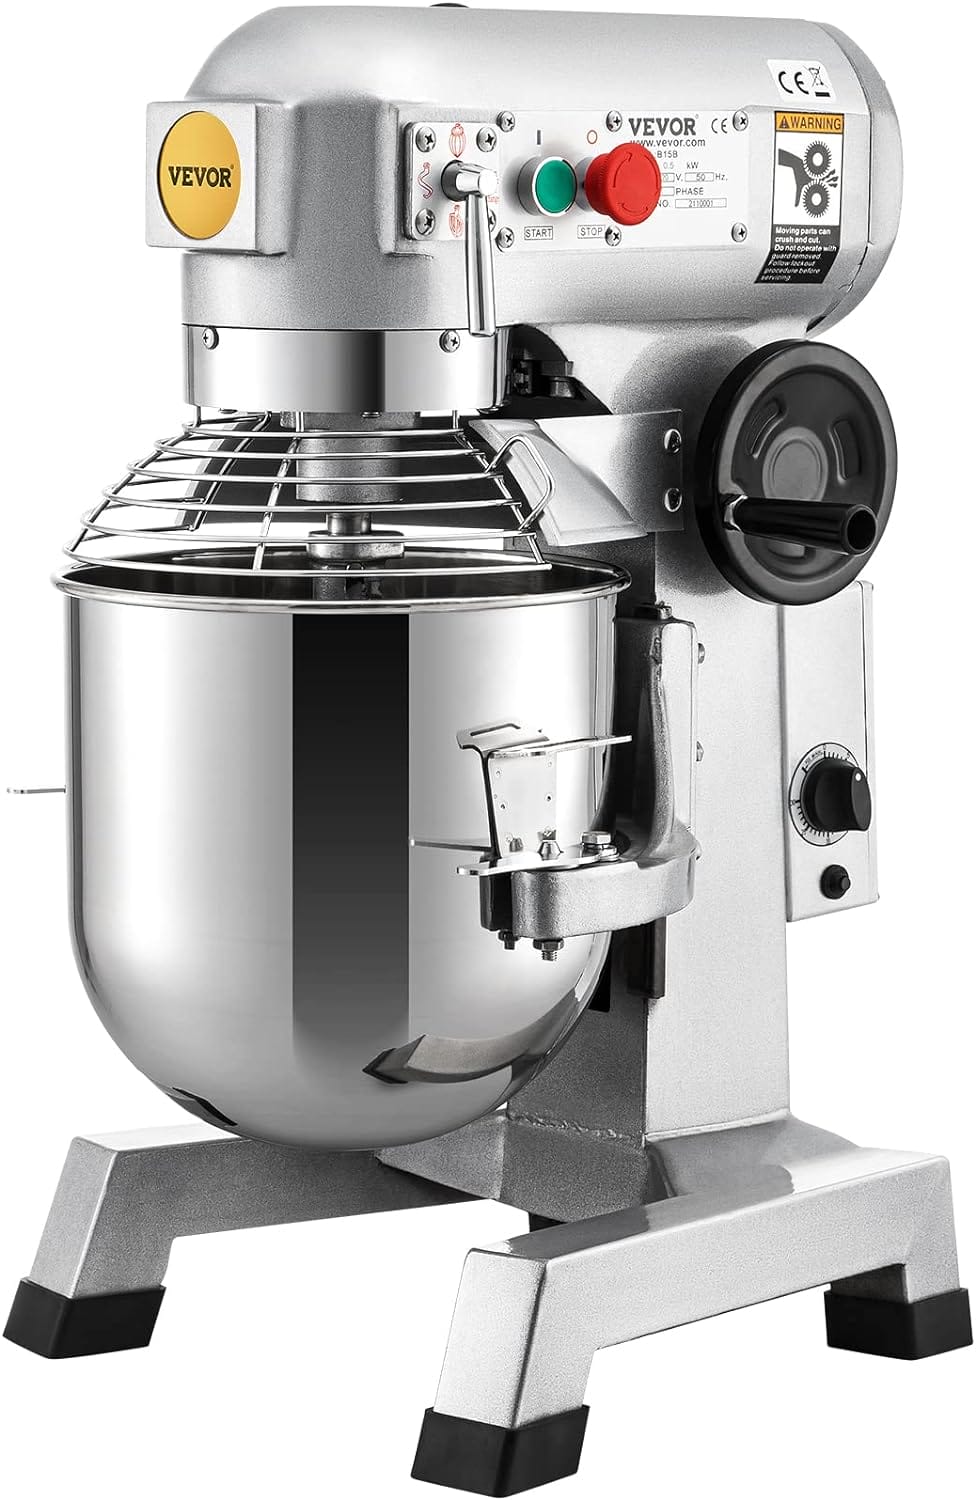 VEVOR Commercial Food Mixer, 15Qt Commercial Mixer with Timing Function, 500W Stainless Steel Bowl Heavy Duty Electric Food Mixer Commercial with 3 Speeds Adjustable 113/184/341 RPM, Dough Hook Whisk Beater Included, Perfect for Bakery Pizzeria